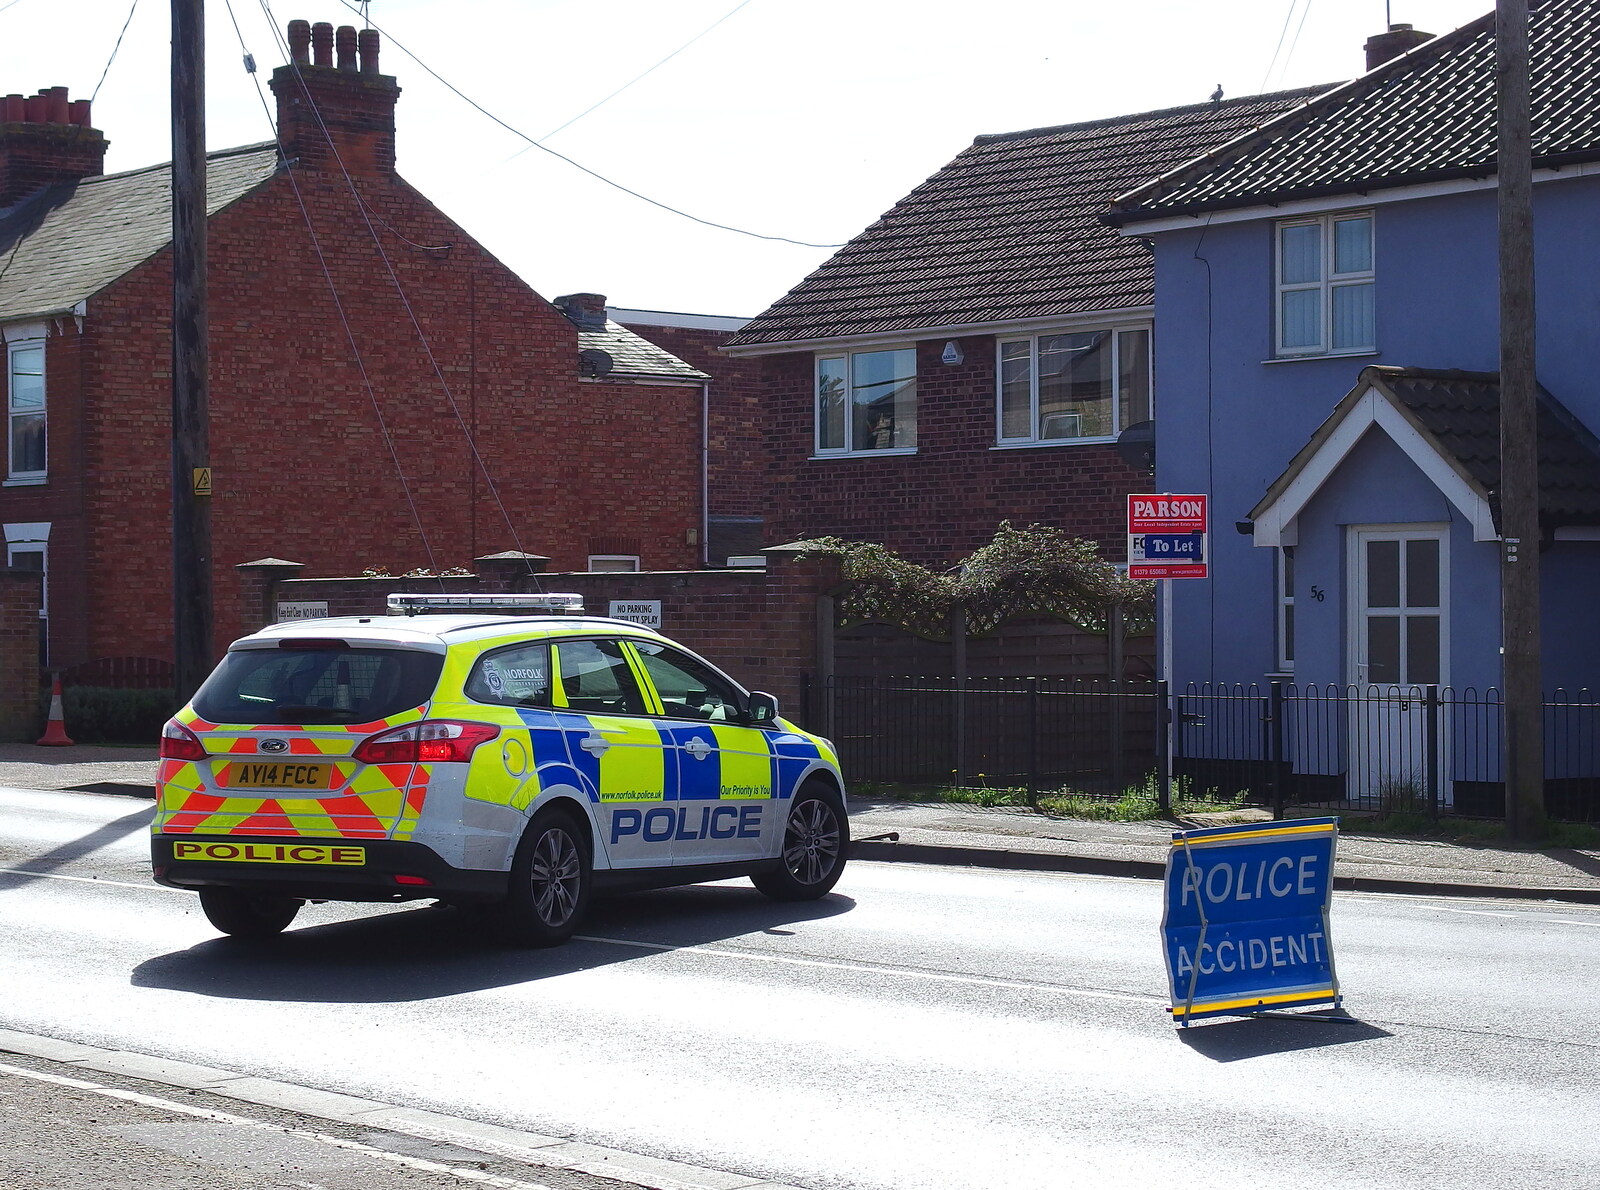 A police car blocks Victoria Road from The BSCC at The Black Horse, and an April Miscellany, Thorndon, Diss and Eye, Suffolk - 10th April 2014